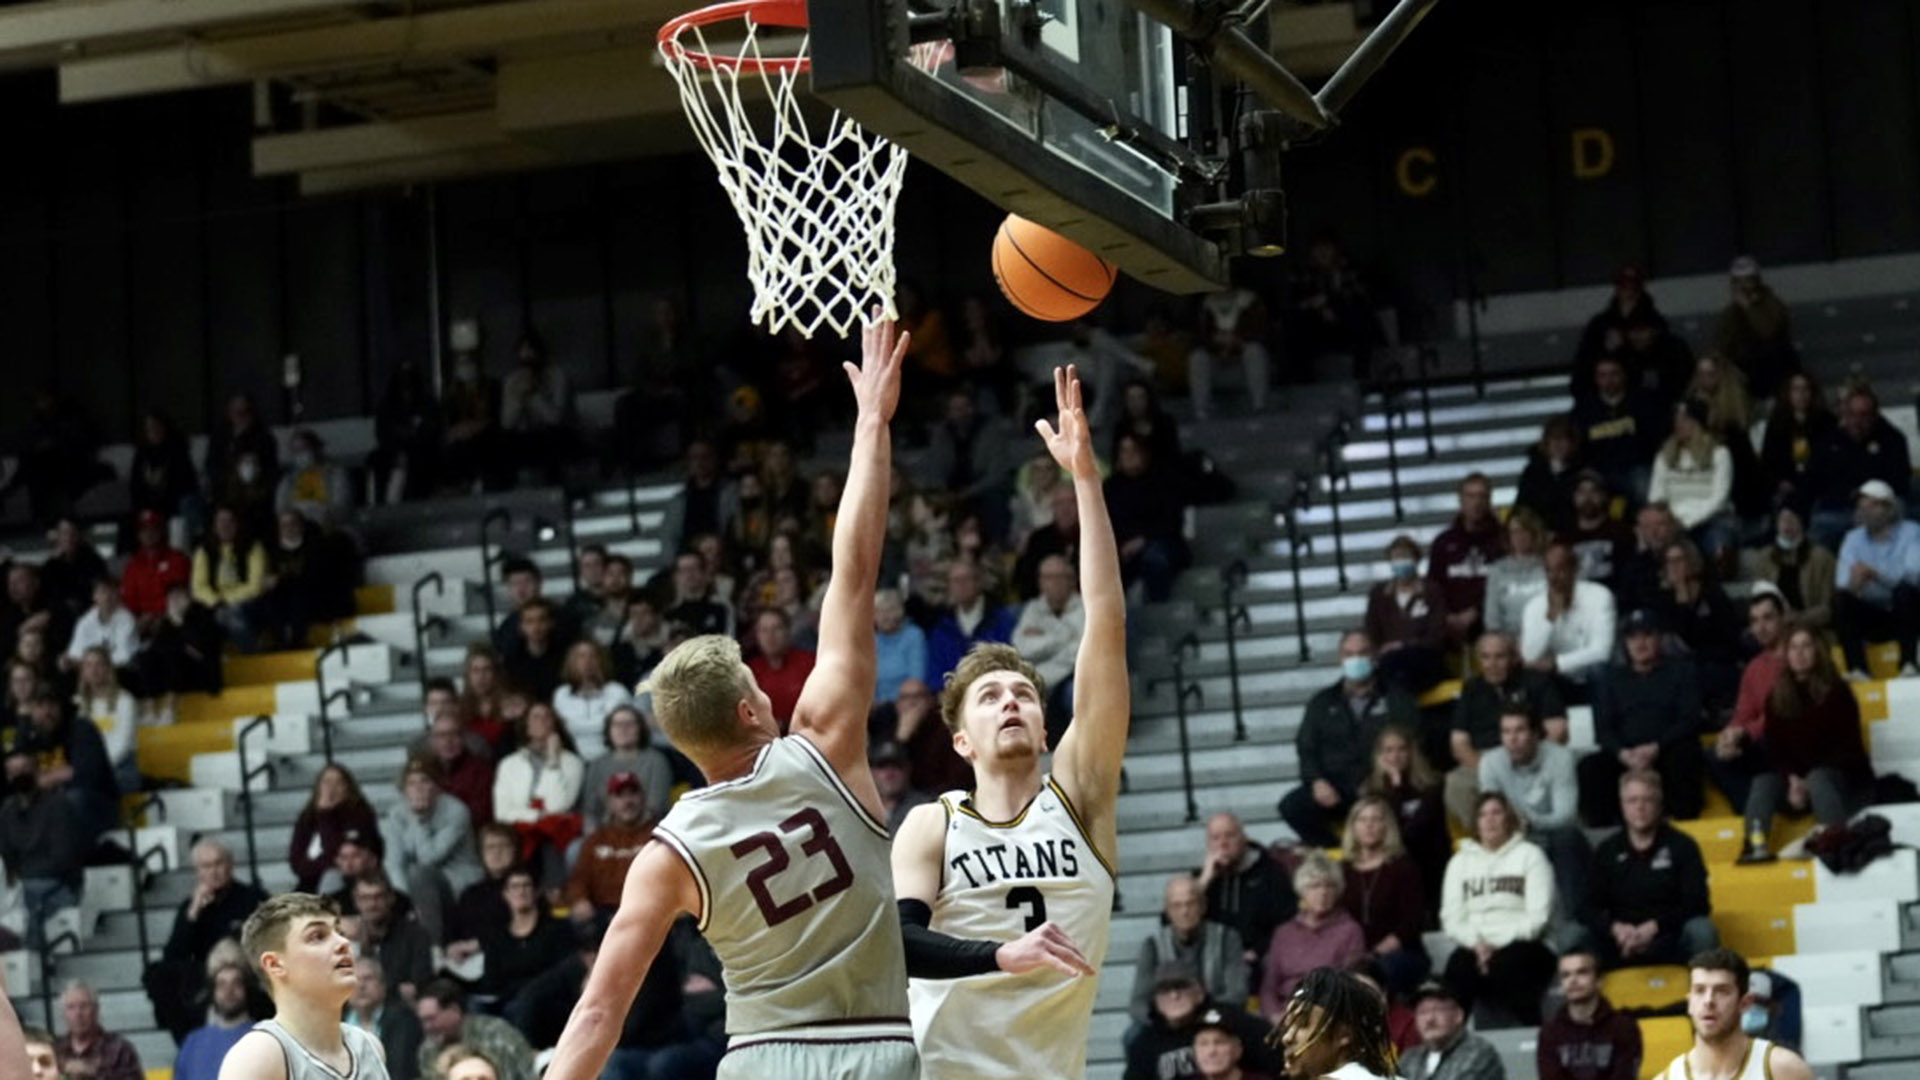 Eddie Muench scored a game-high 27 points, including seven 3-point baskets, against the Eagles.